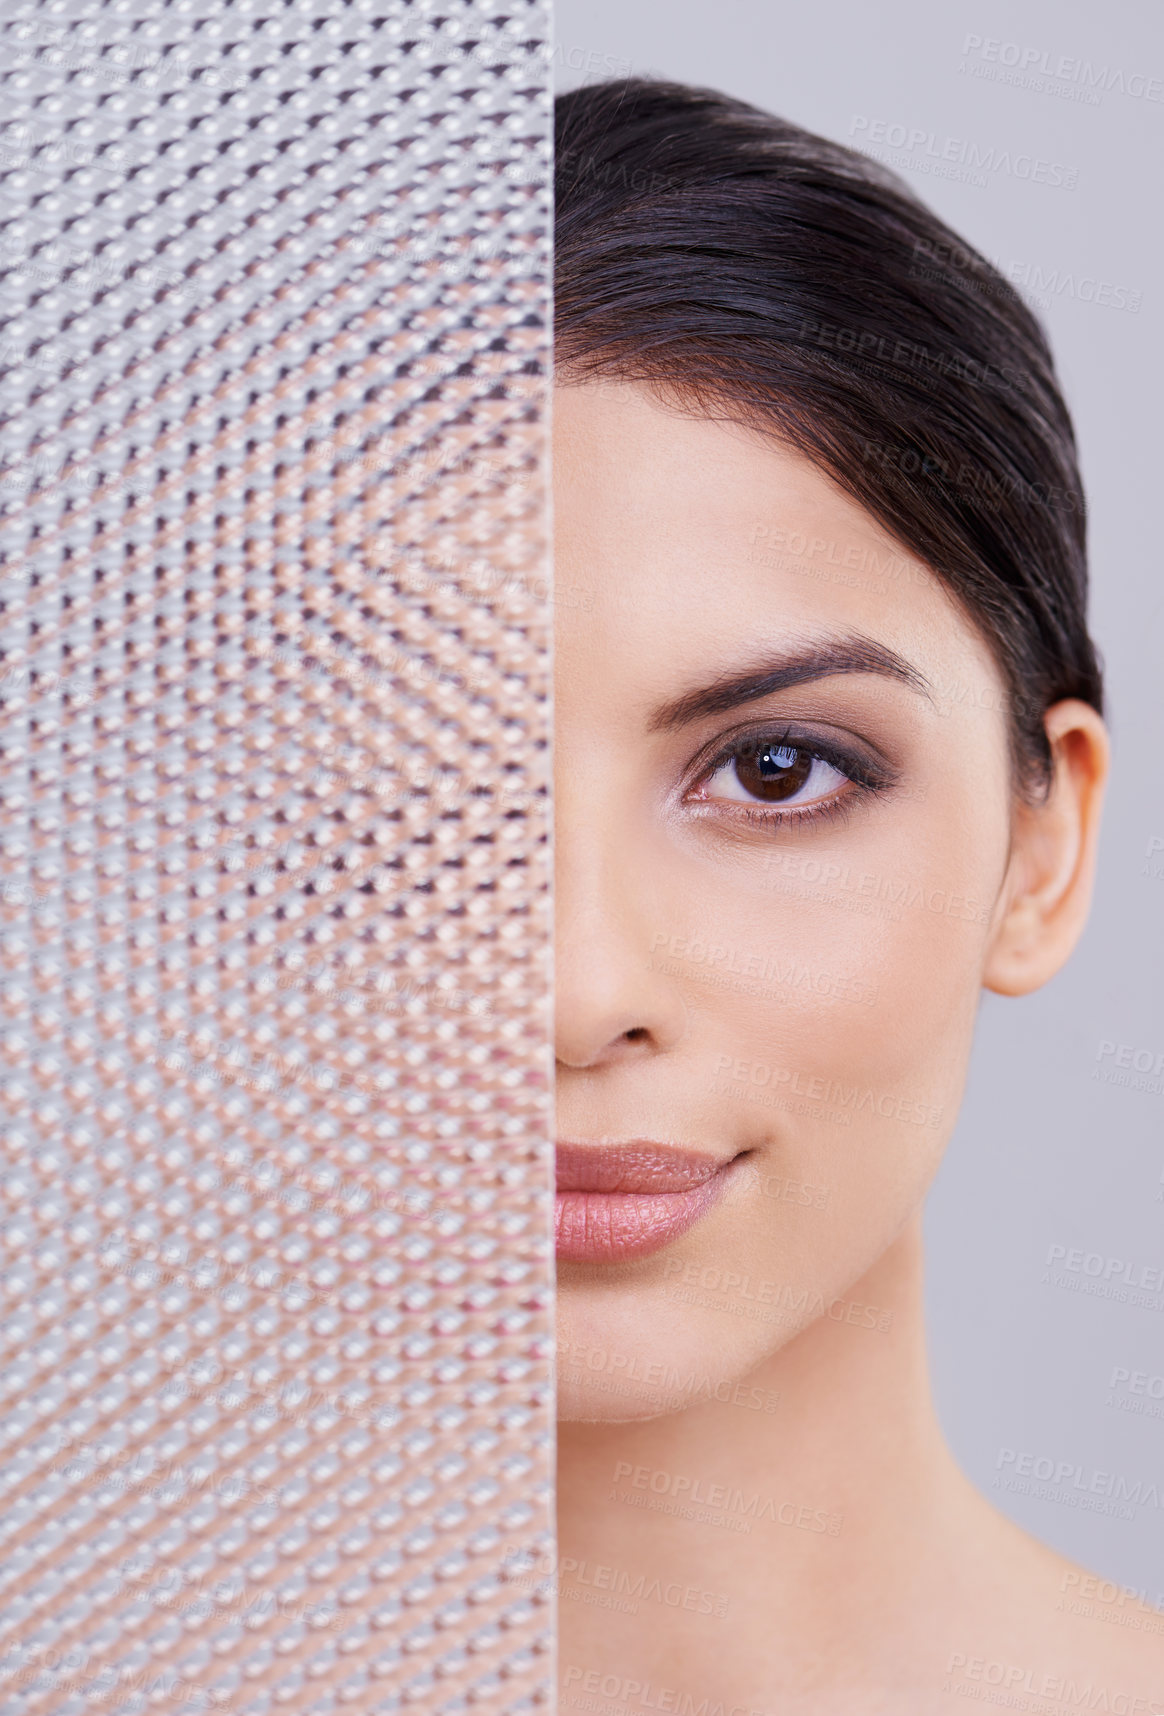 Buy stock photo Shot of a beautiful young woman with her face partially obscured through a plastic panel